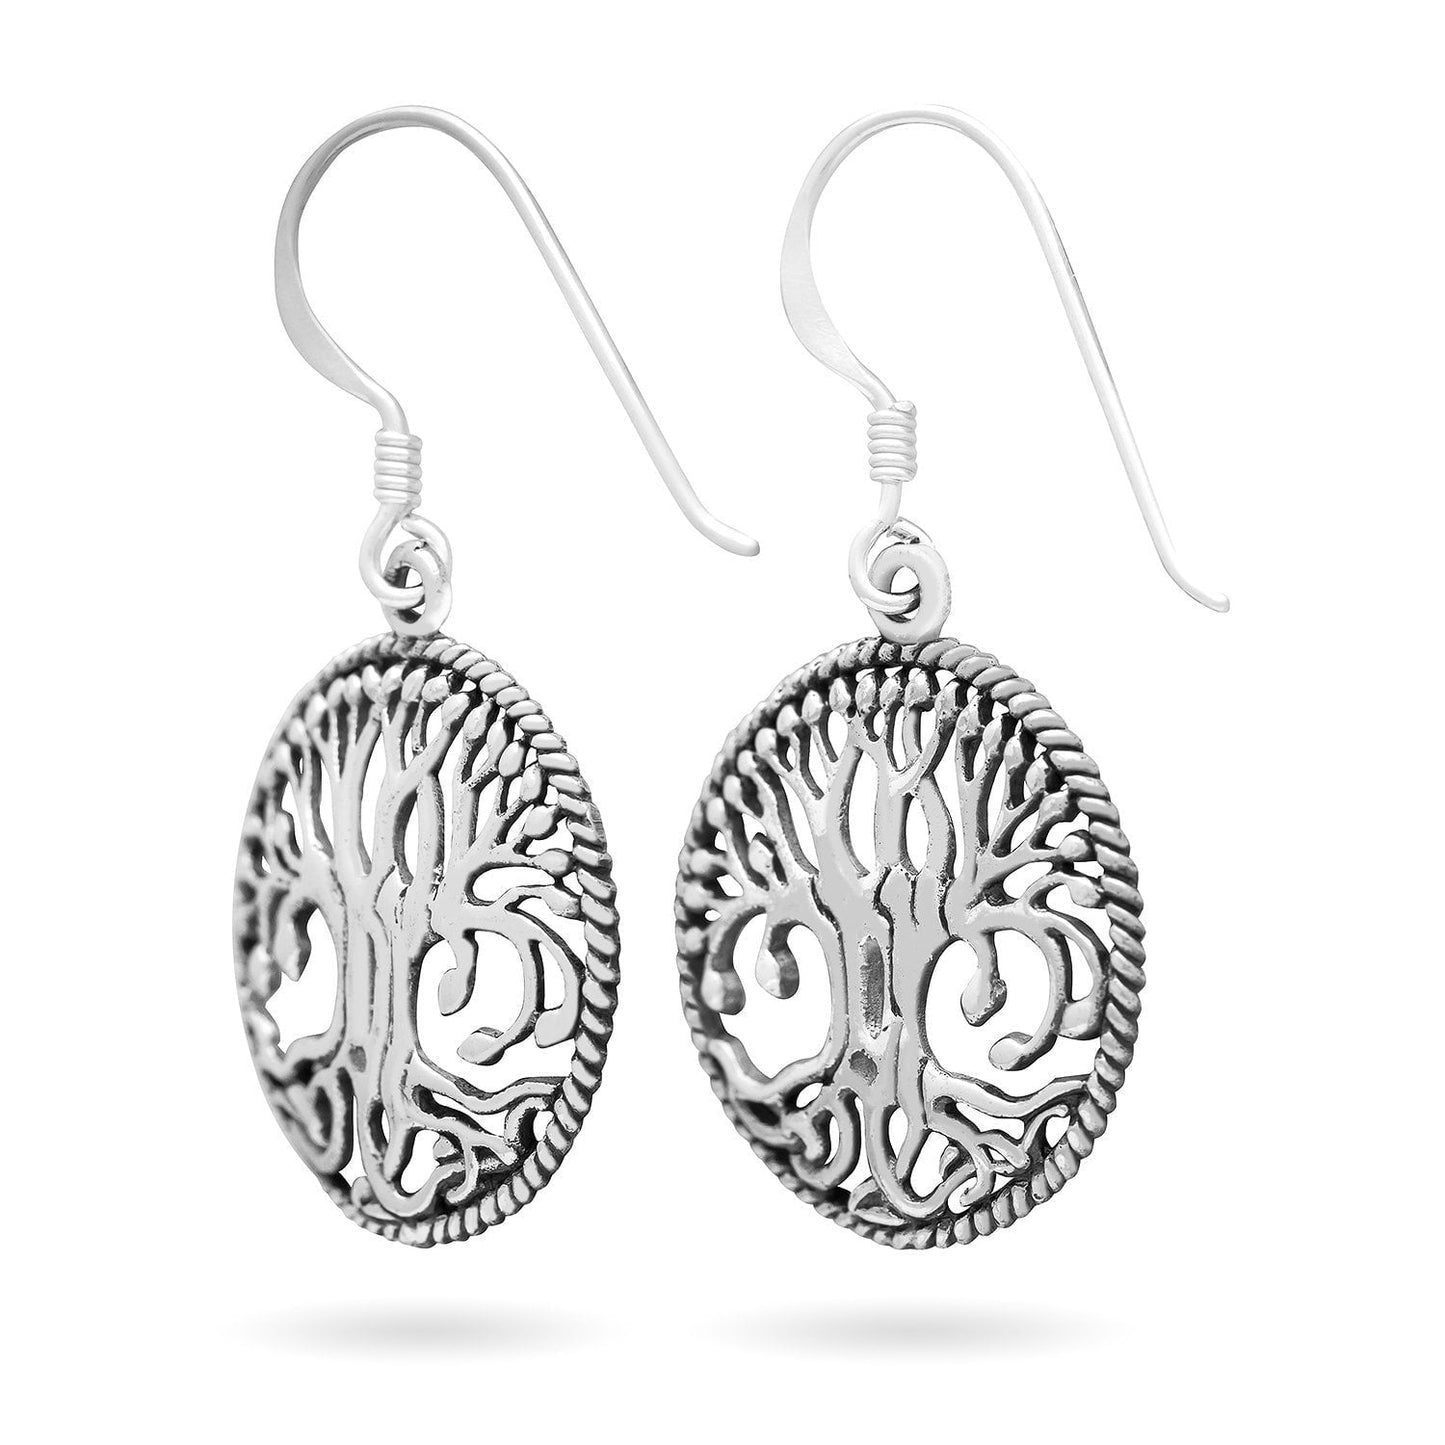 925 Sterling Silver Yggdrasil Norse Tree of Life Viking Jewelry Earrings - Cosmic Serenity Shop